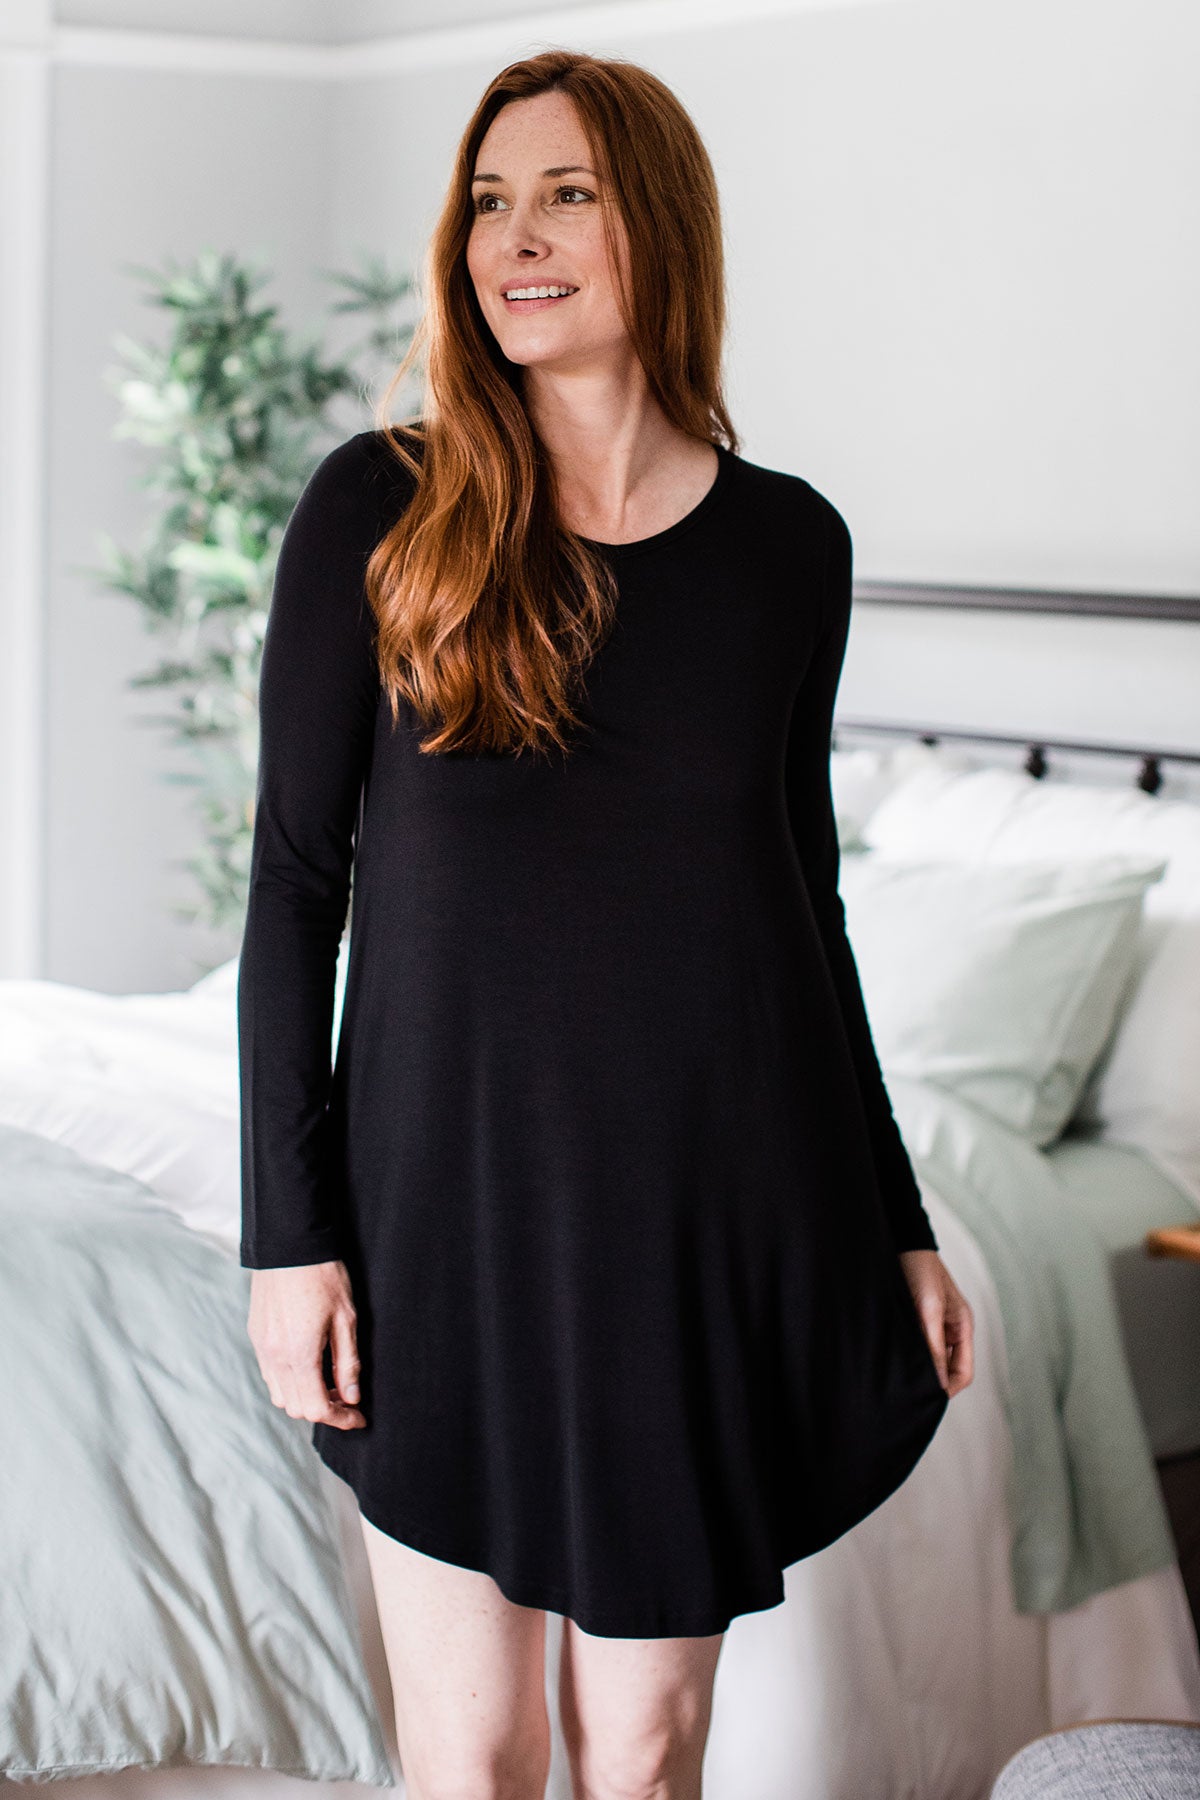 A woman standing and smiling while looking off to the side, wearing Yala Norah Long Sleeve Bamboo Nightshirt in Black